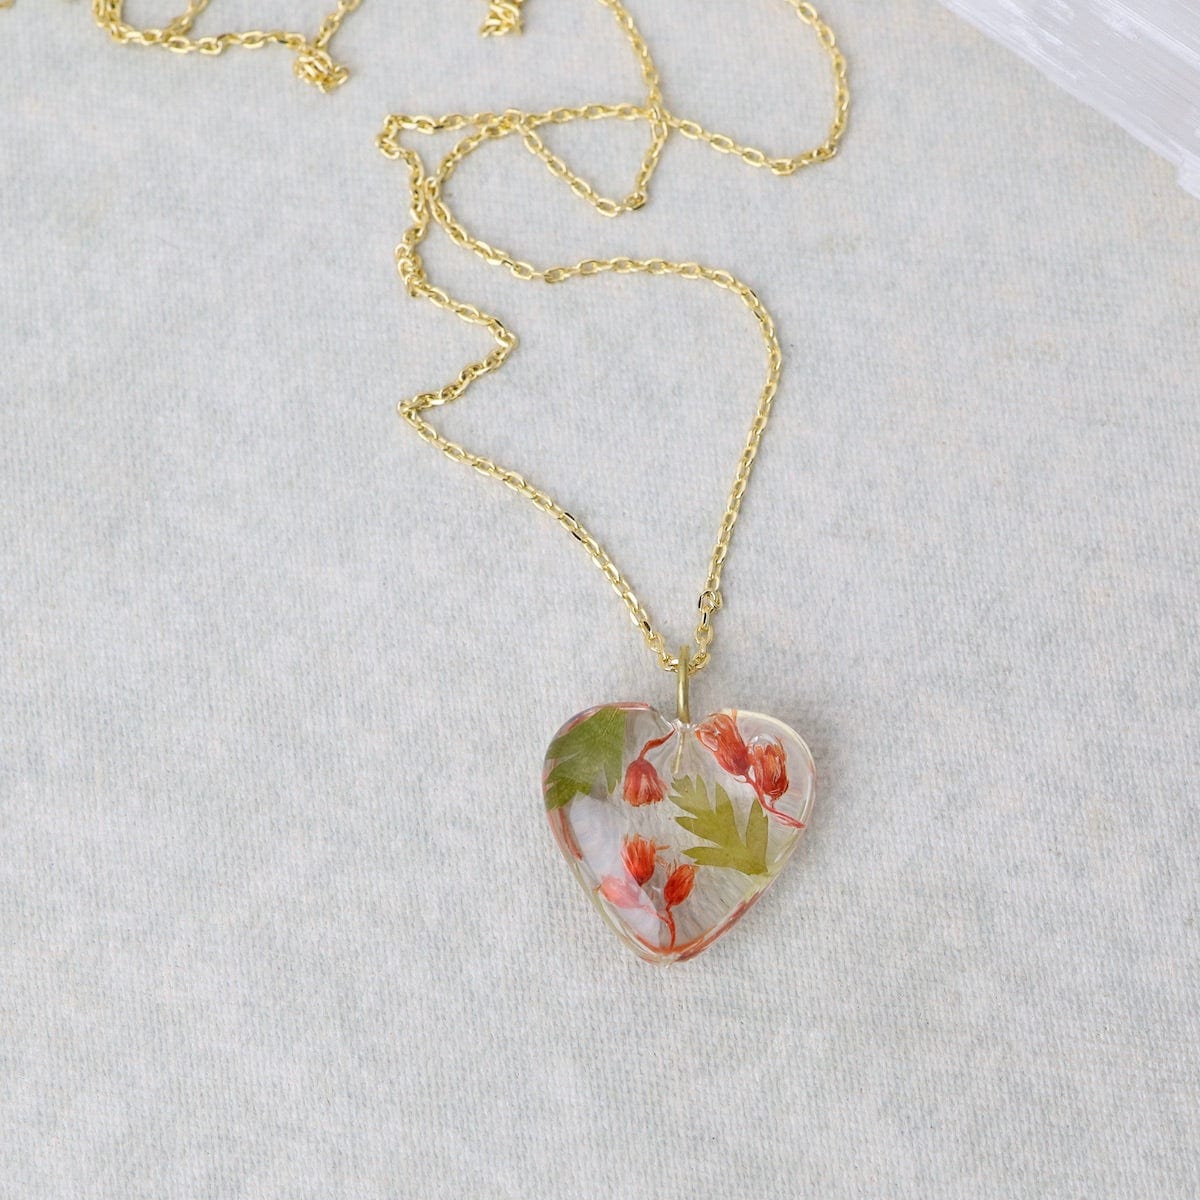 NKL-GPL Botanical Mini Heart Necklace - "Holly and the Joy" December Birthday Month